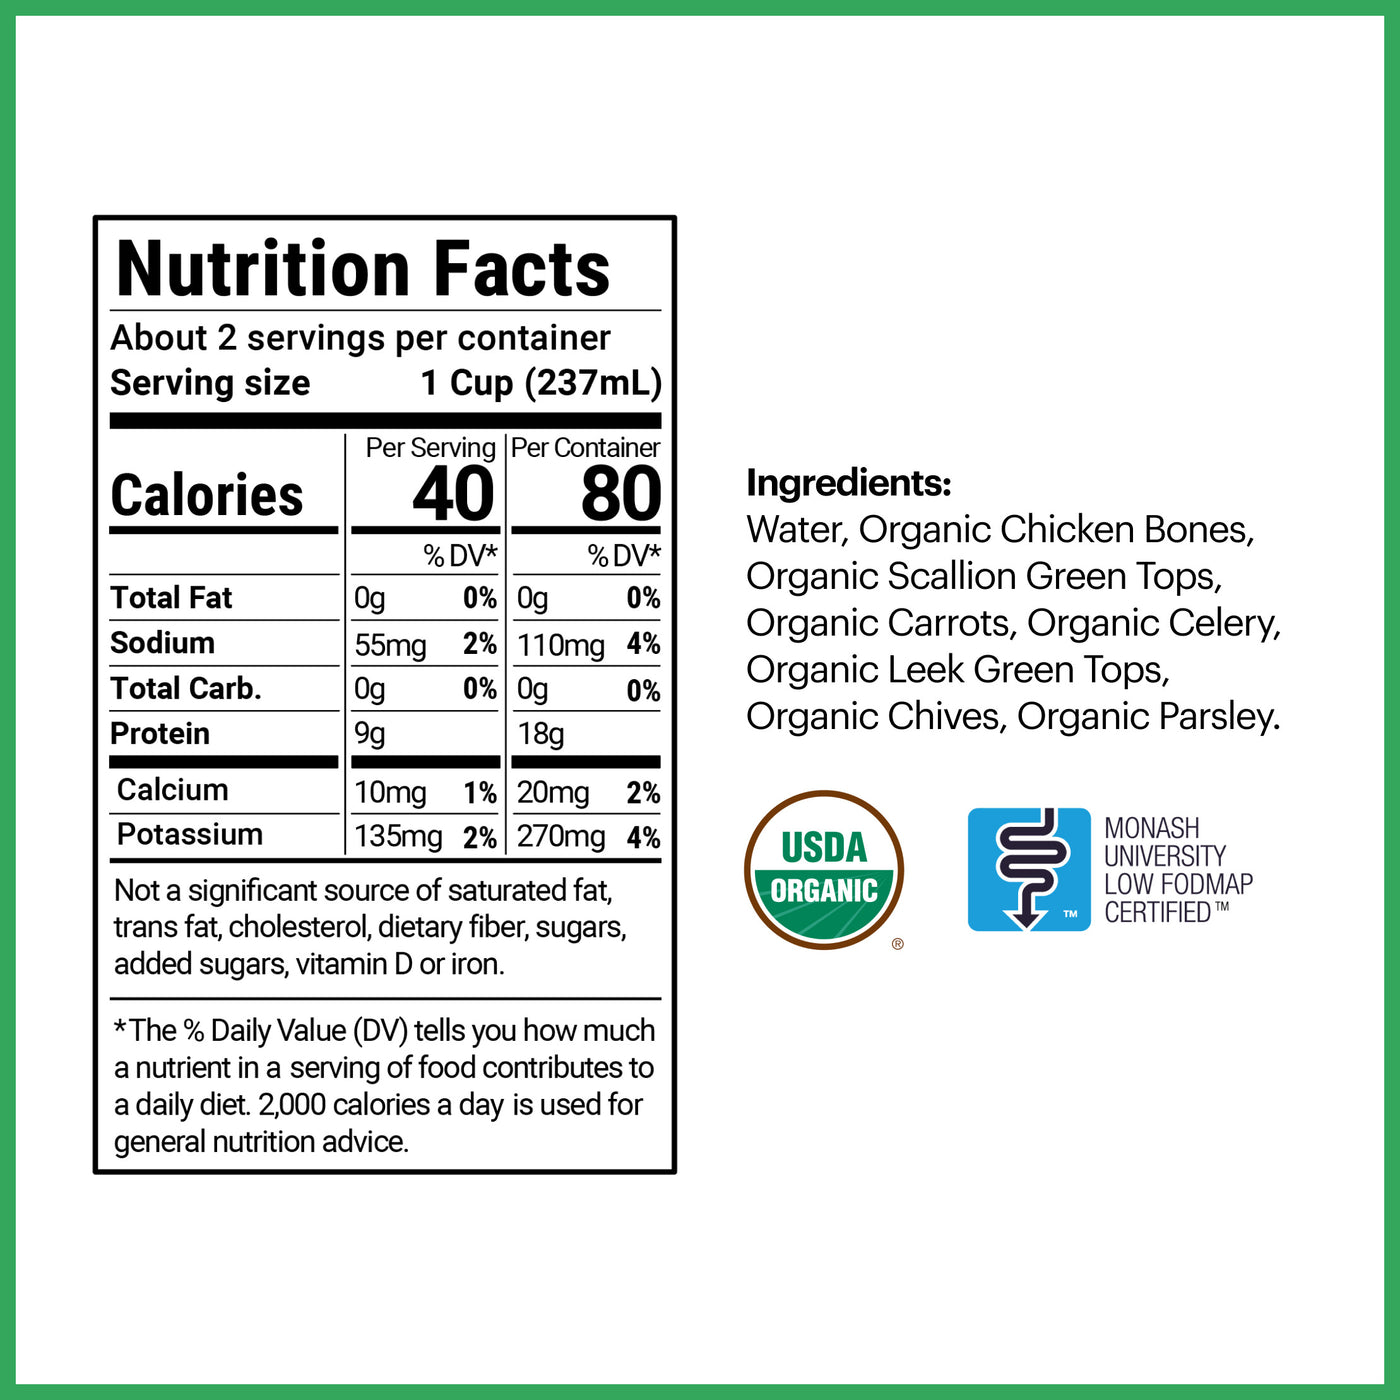 2 servings per container, each serving being 1 cup (237 mL). 40 calories per serving with 0g of total fat, 55mg of sodium, 0g of total carbohydrates, 9g of protein, 10mg of calcium, and 135mg of potassium. The ingredients are water, organic chicken bones, scallion green tops, carrots, celery, leek green tops, chives, and parsley.